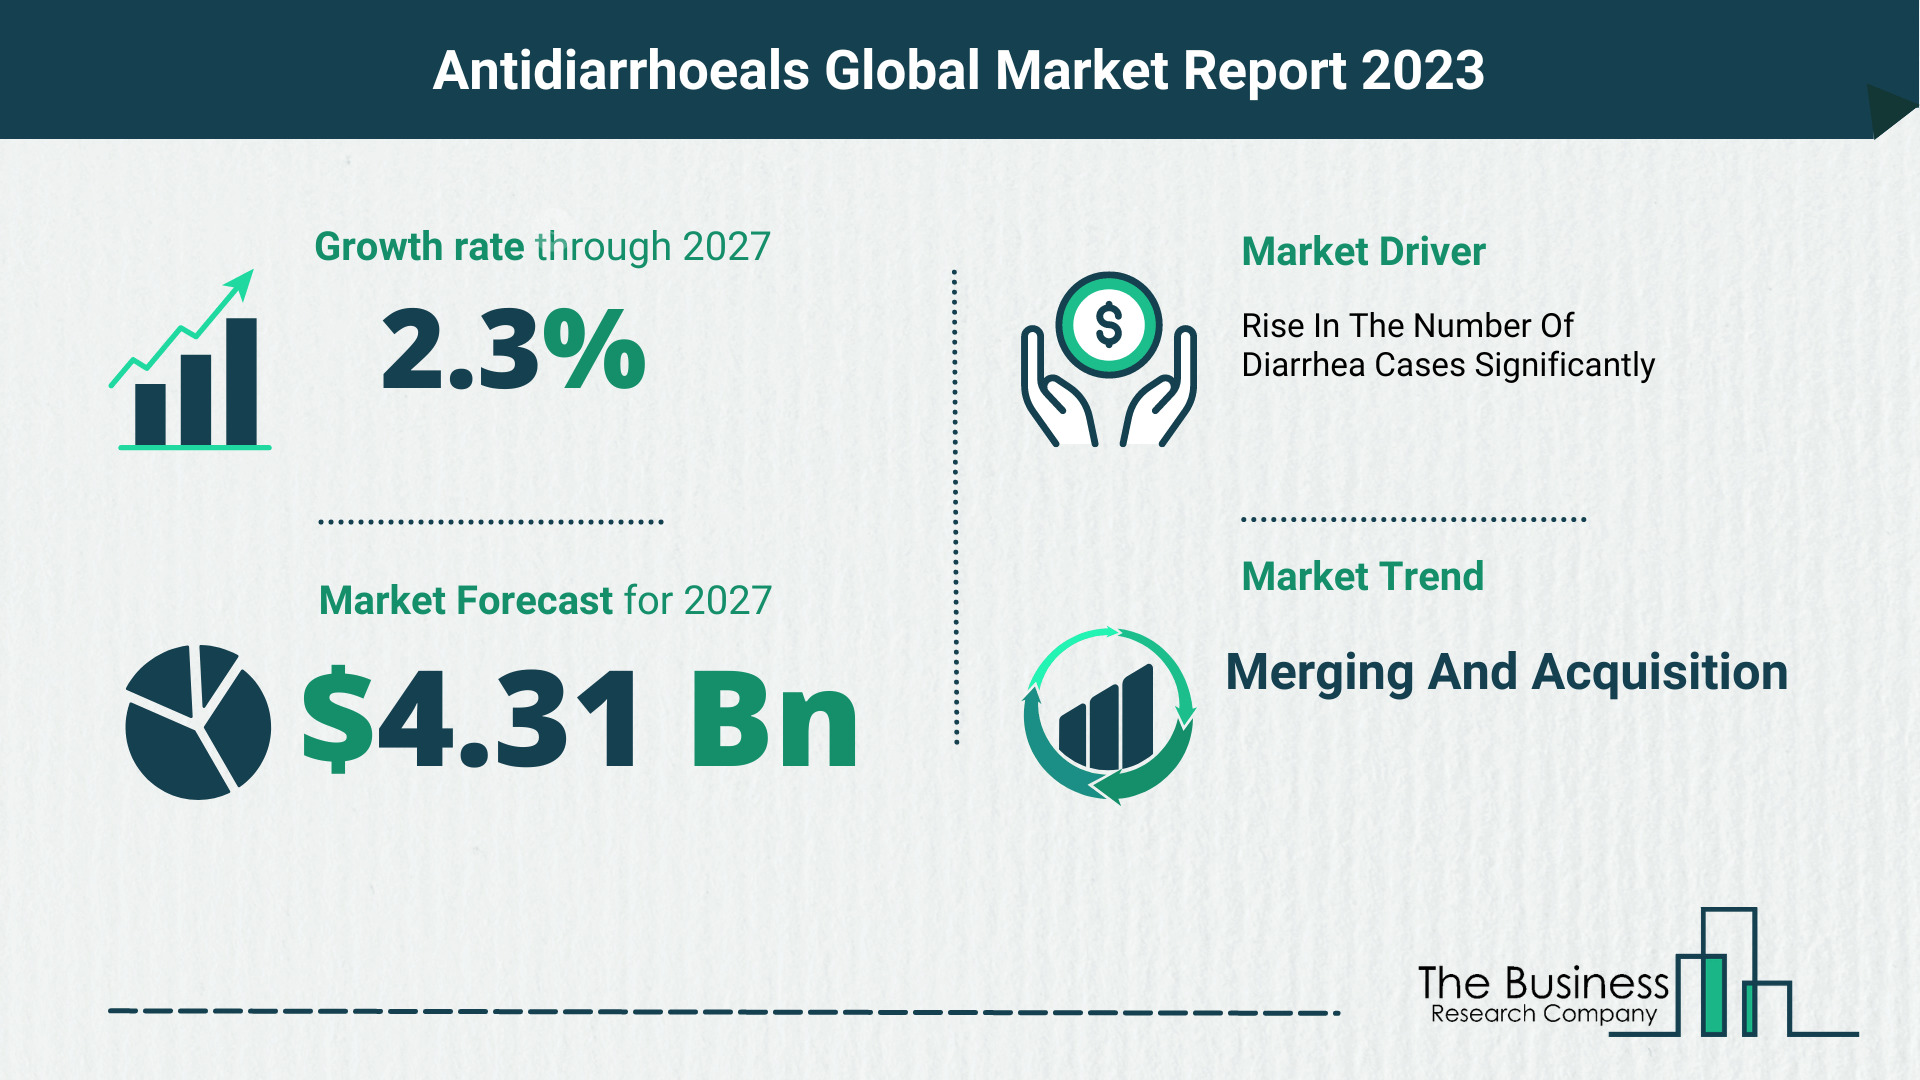 How Will The Antidiarrhoeals Market Globally Expand In 2023?